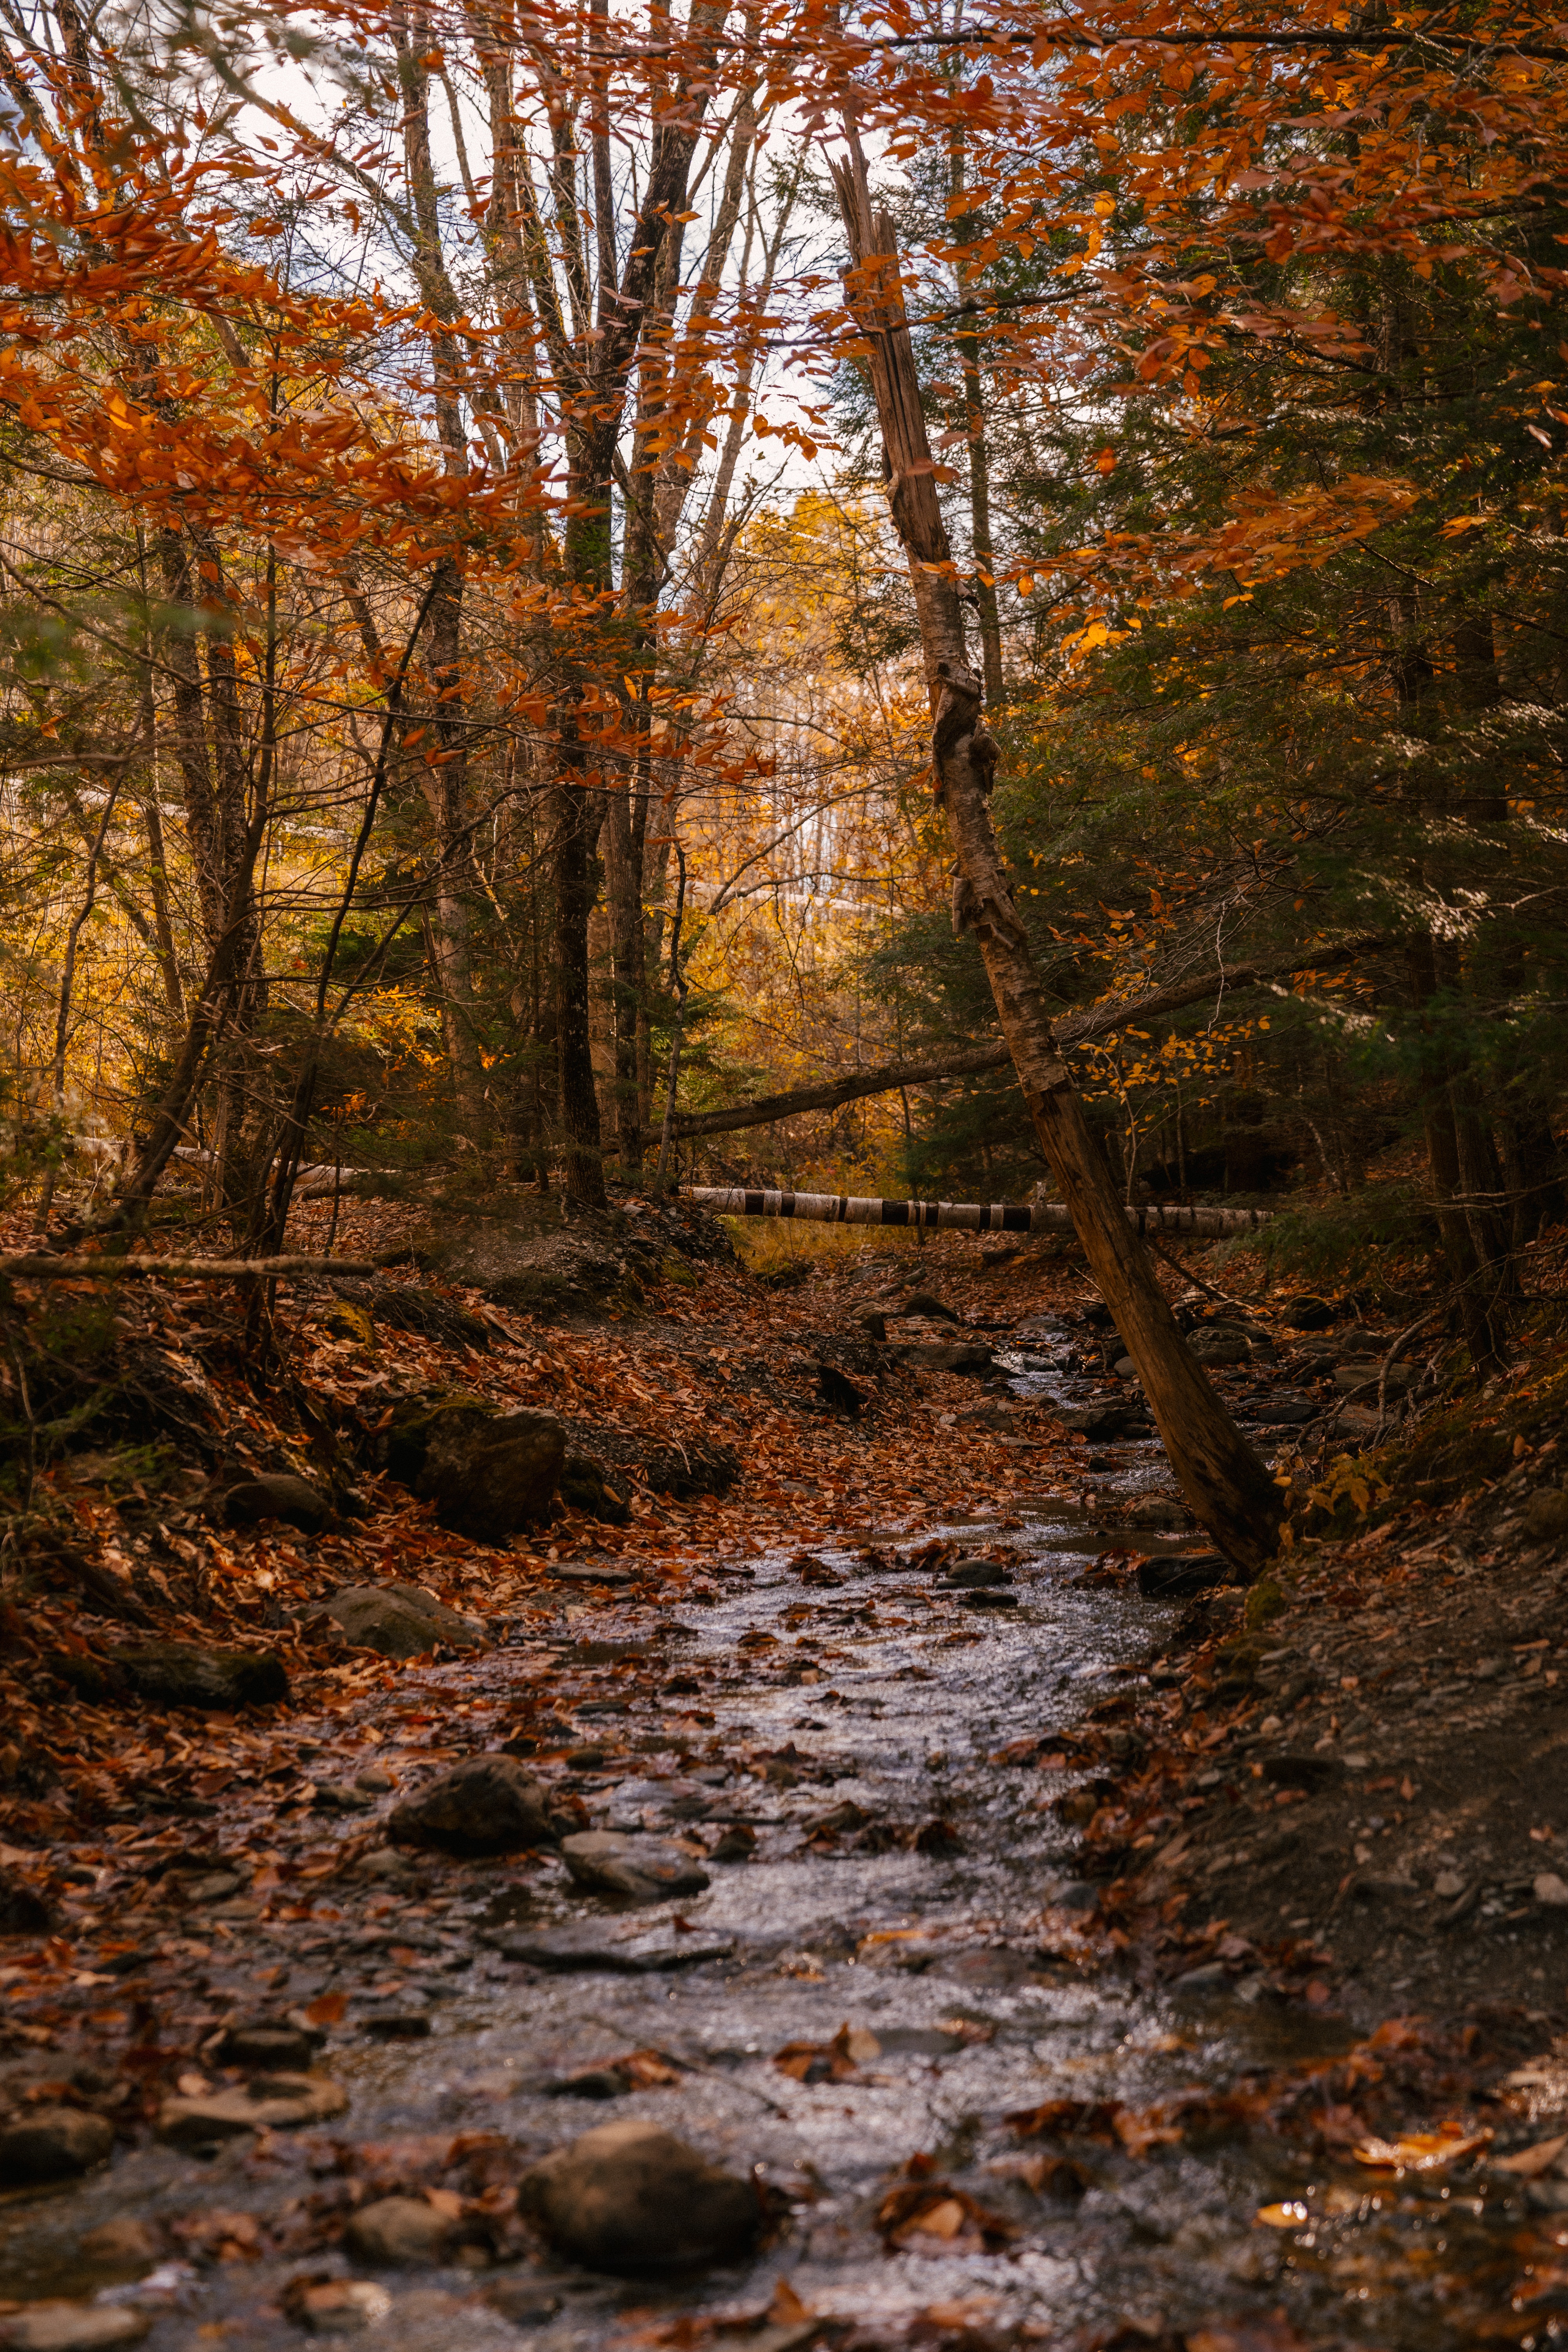 Best Deciduous Forest Photo · 100% Free Downloads